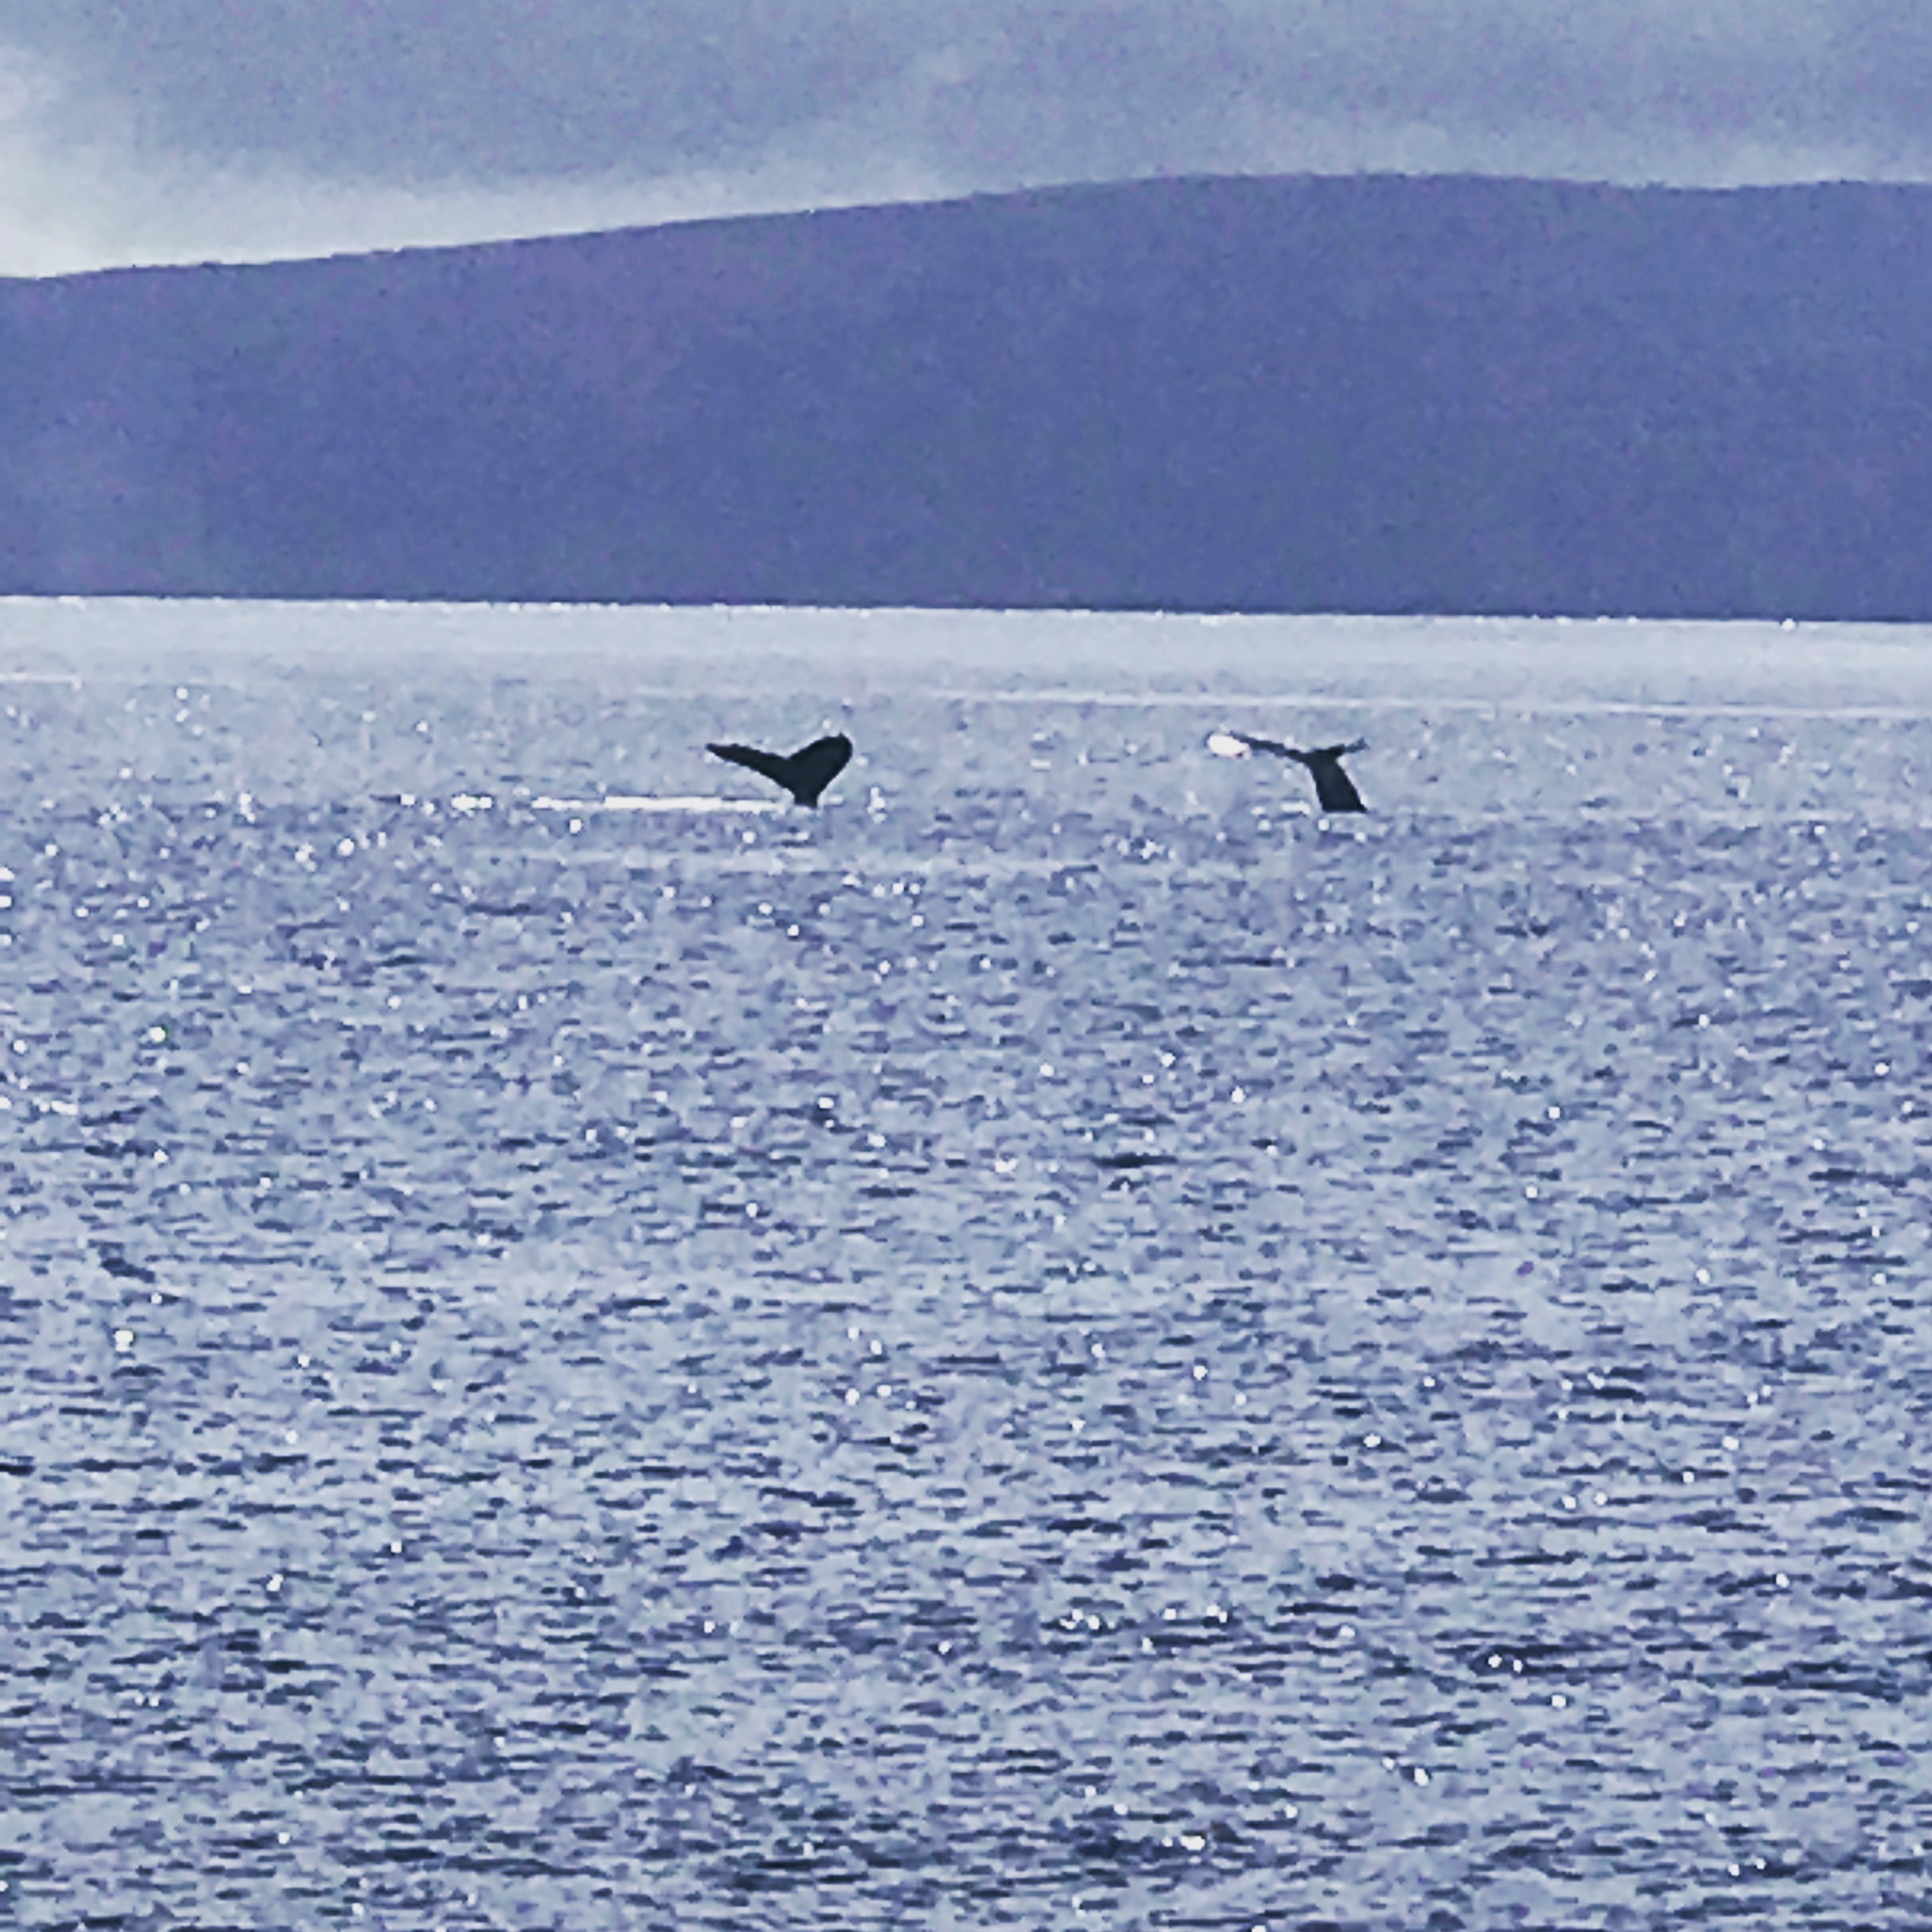 Maui Whale Watching PacWhale Foundation